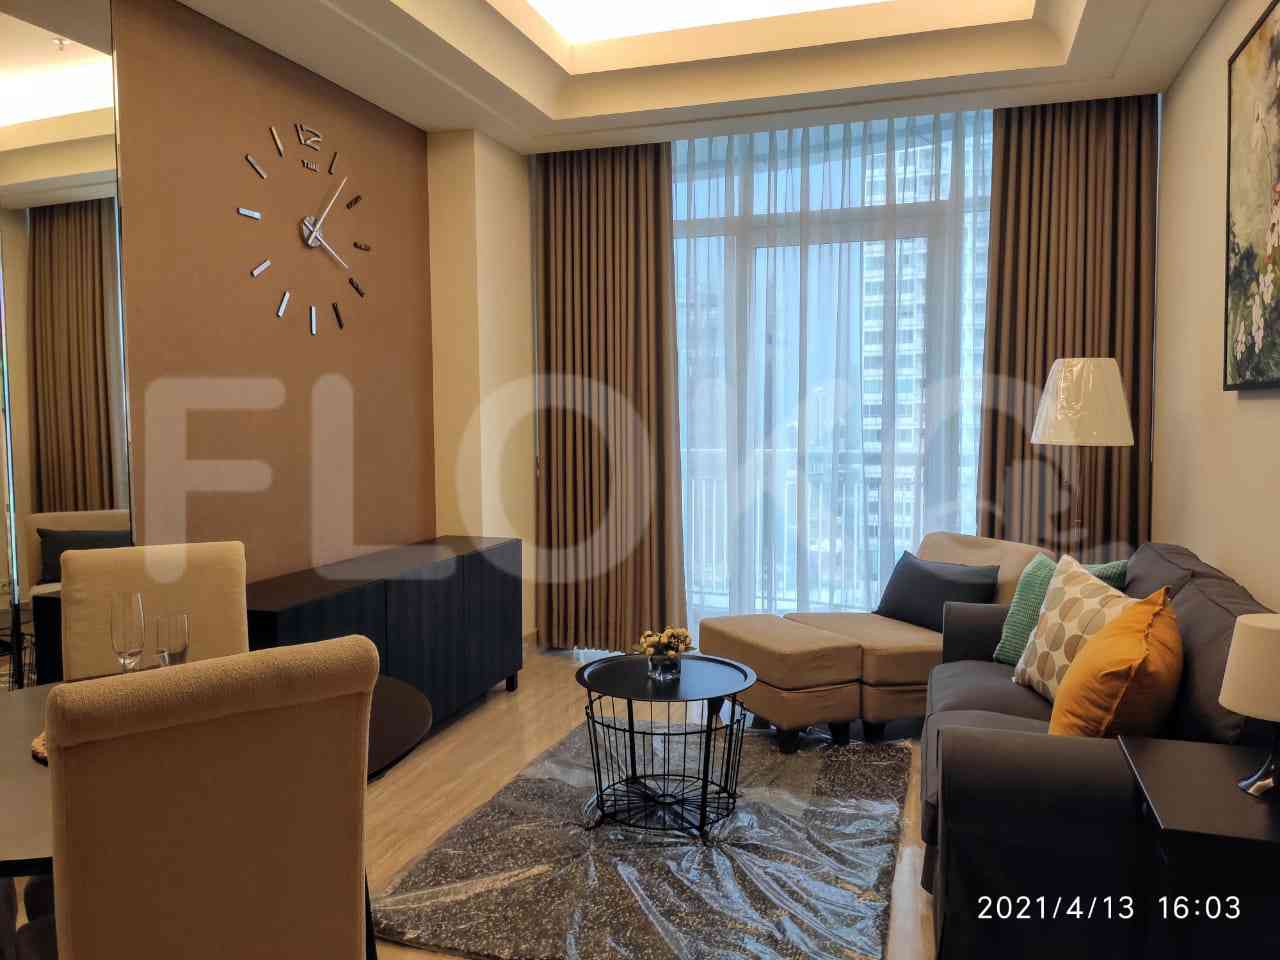 2 Bedroom on 18th Floor for Rent in South Hills Apartment - fkuc32 1